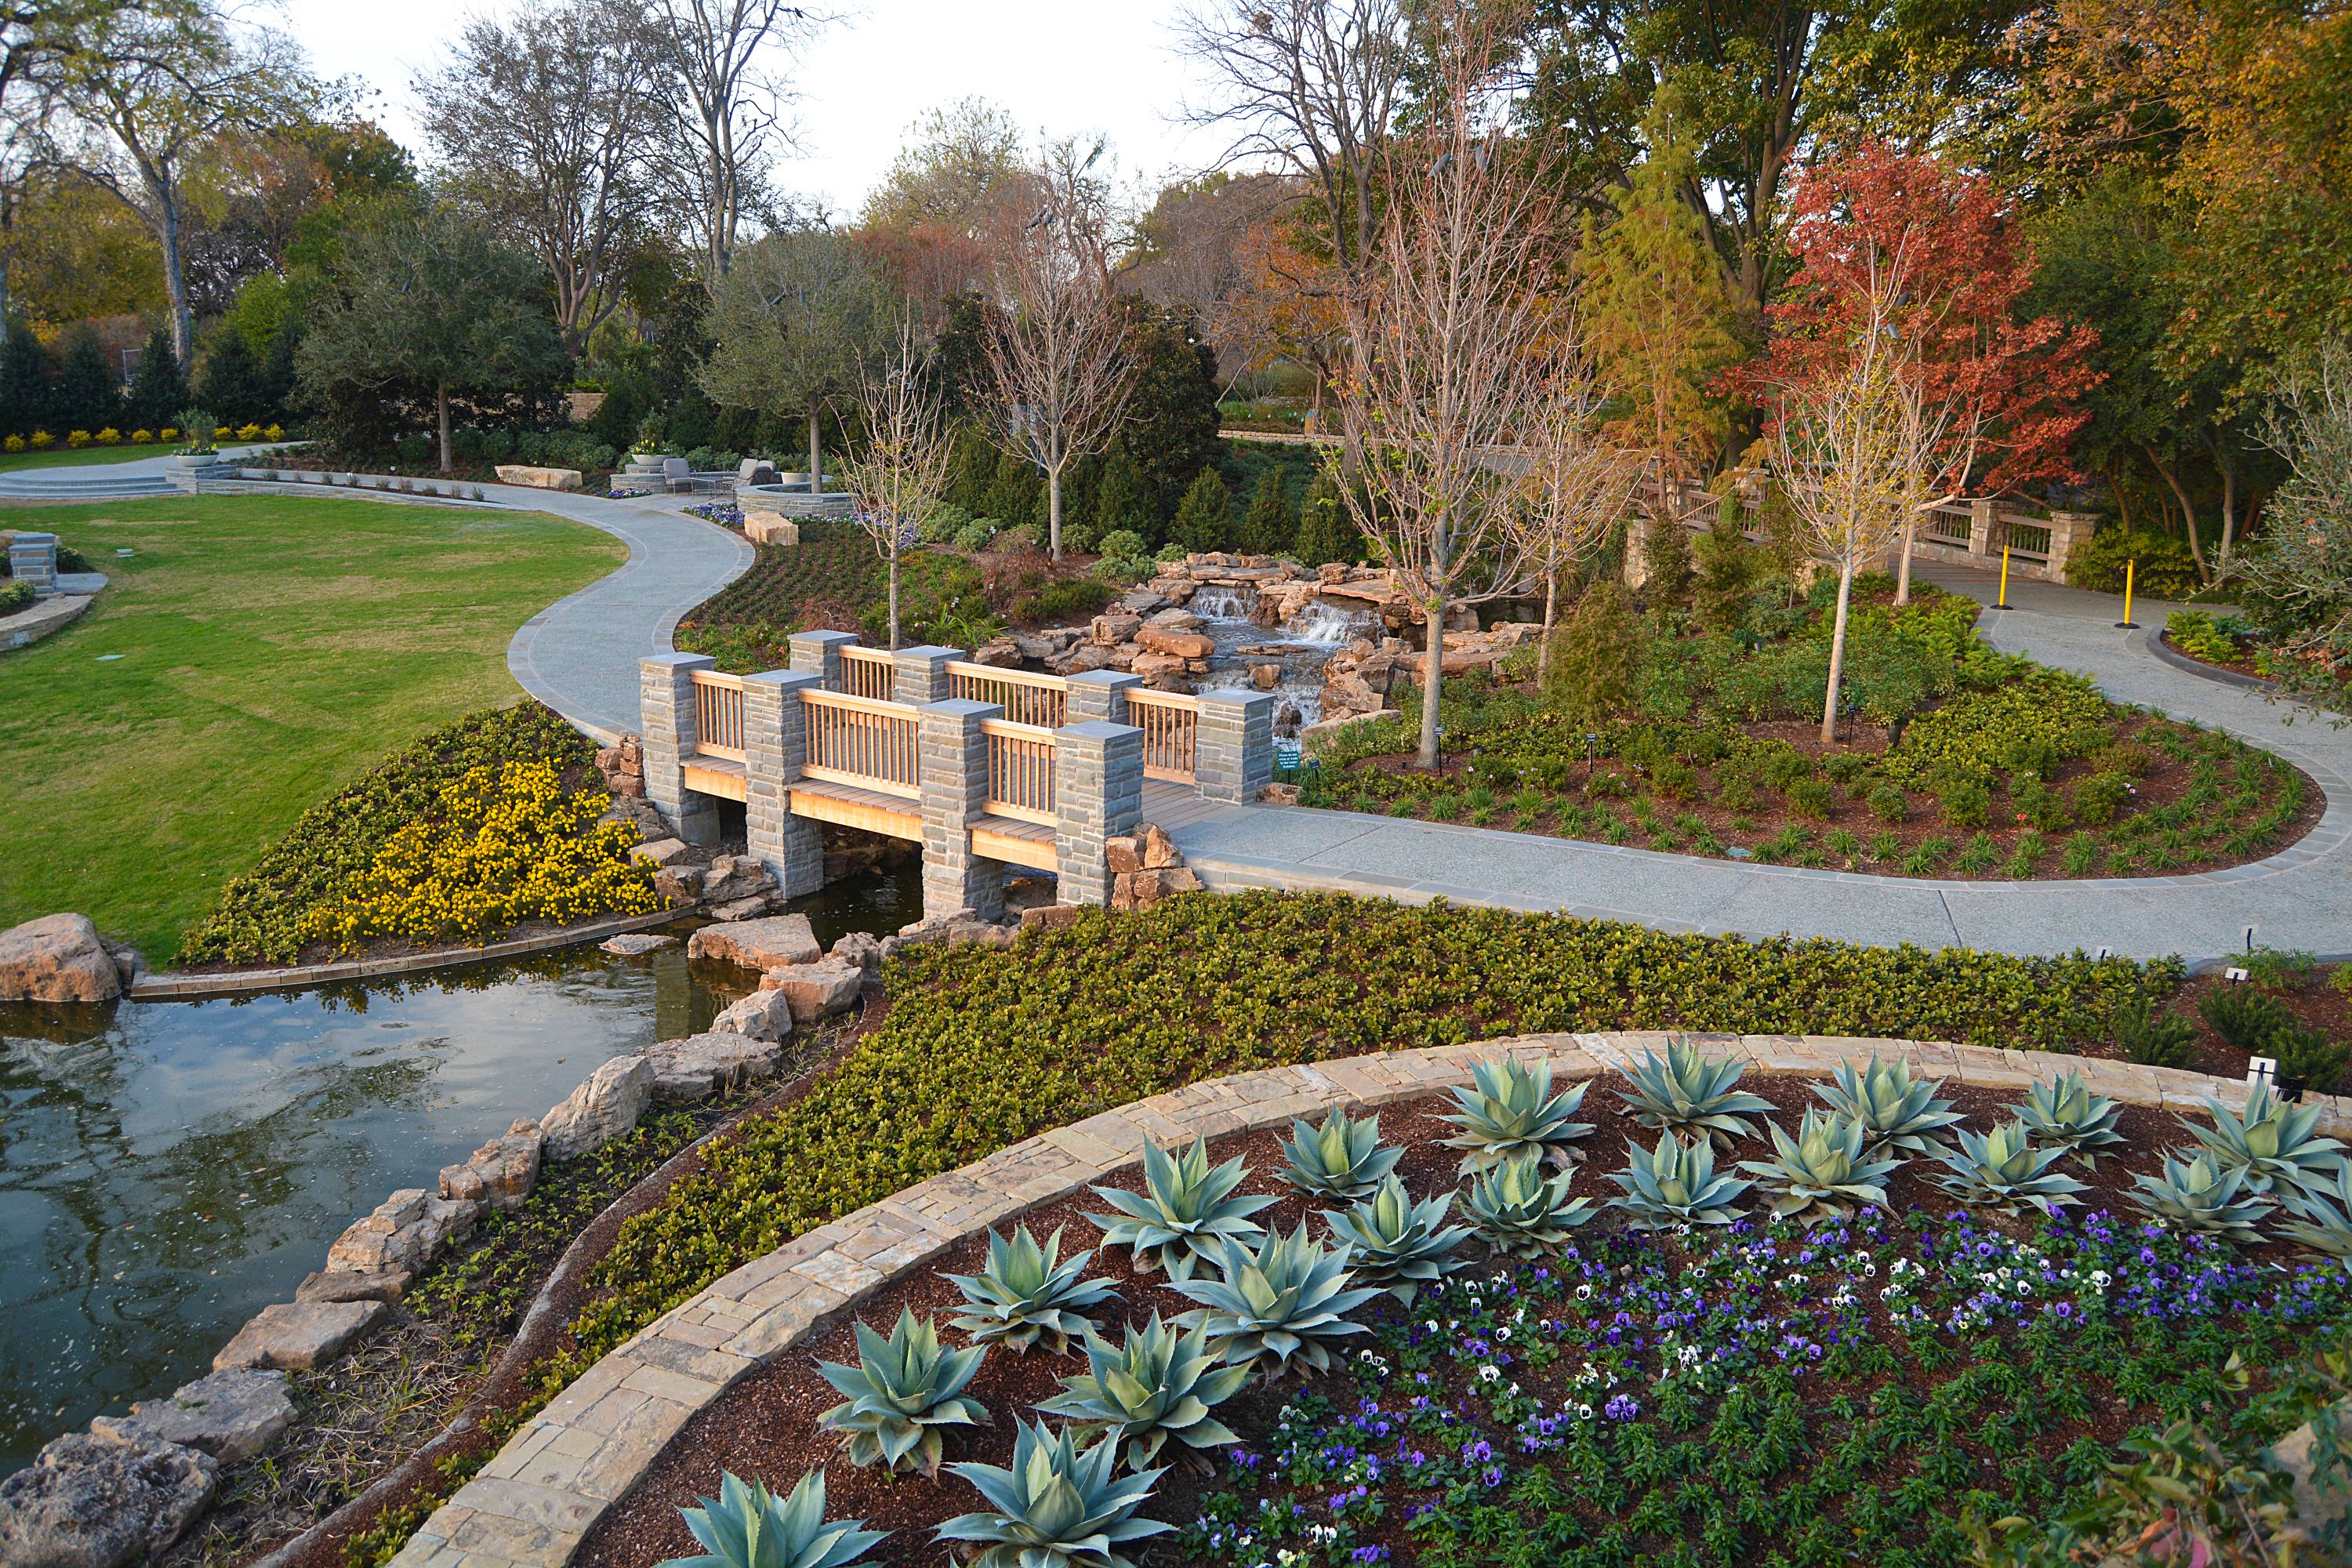 Find Peace and Quiet to Connect with Nature at the Dallas Arboretum